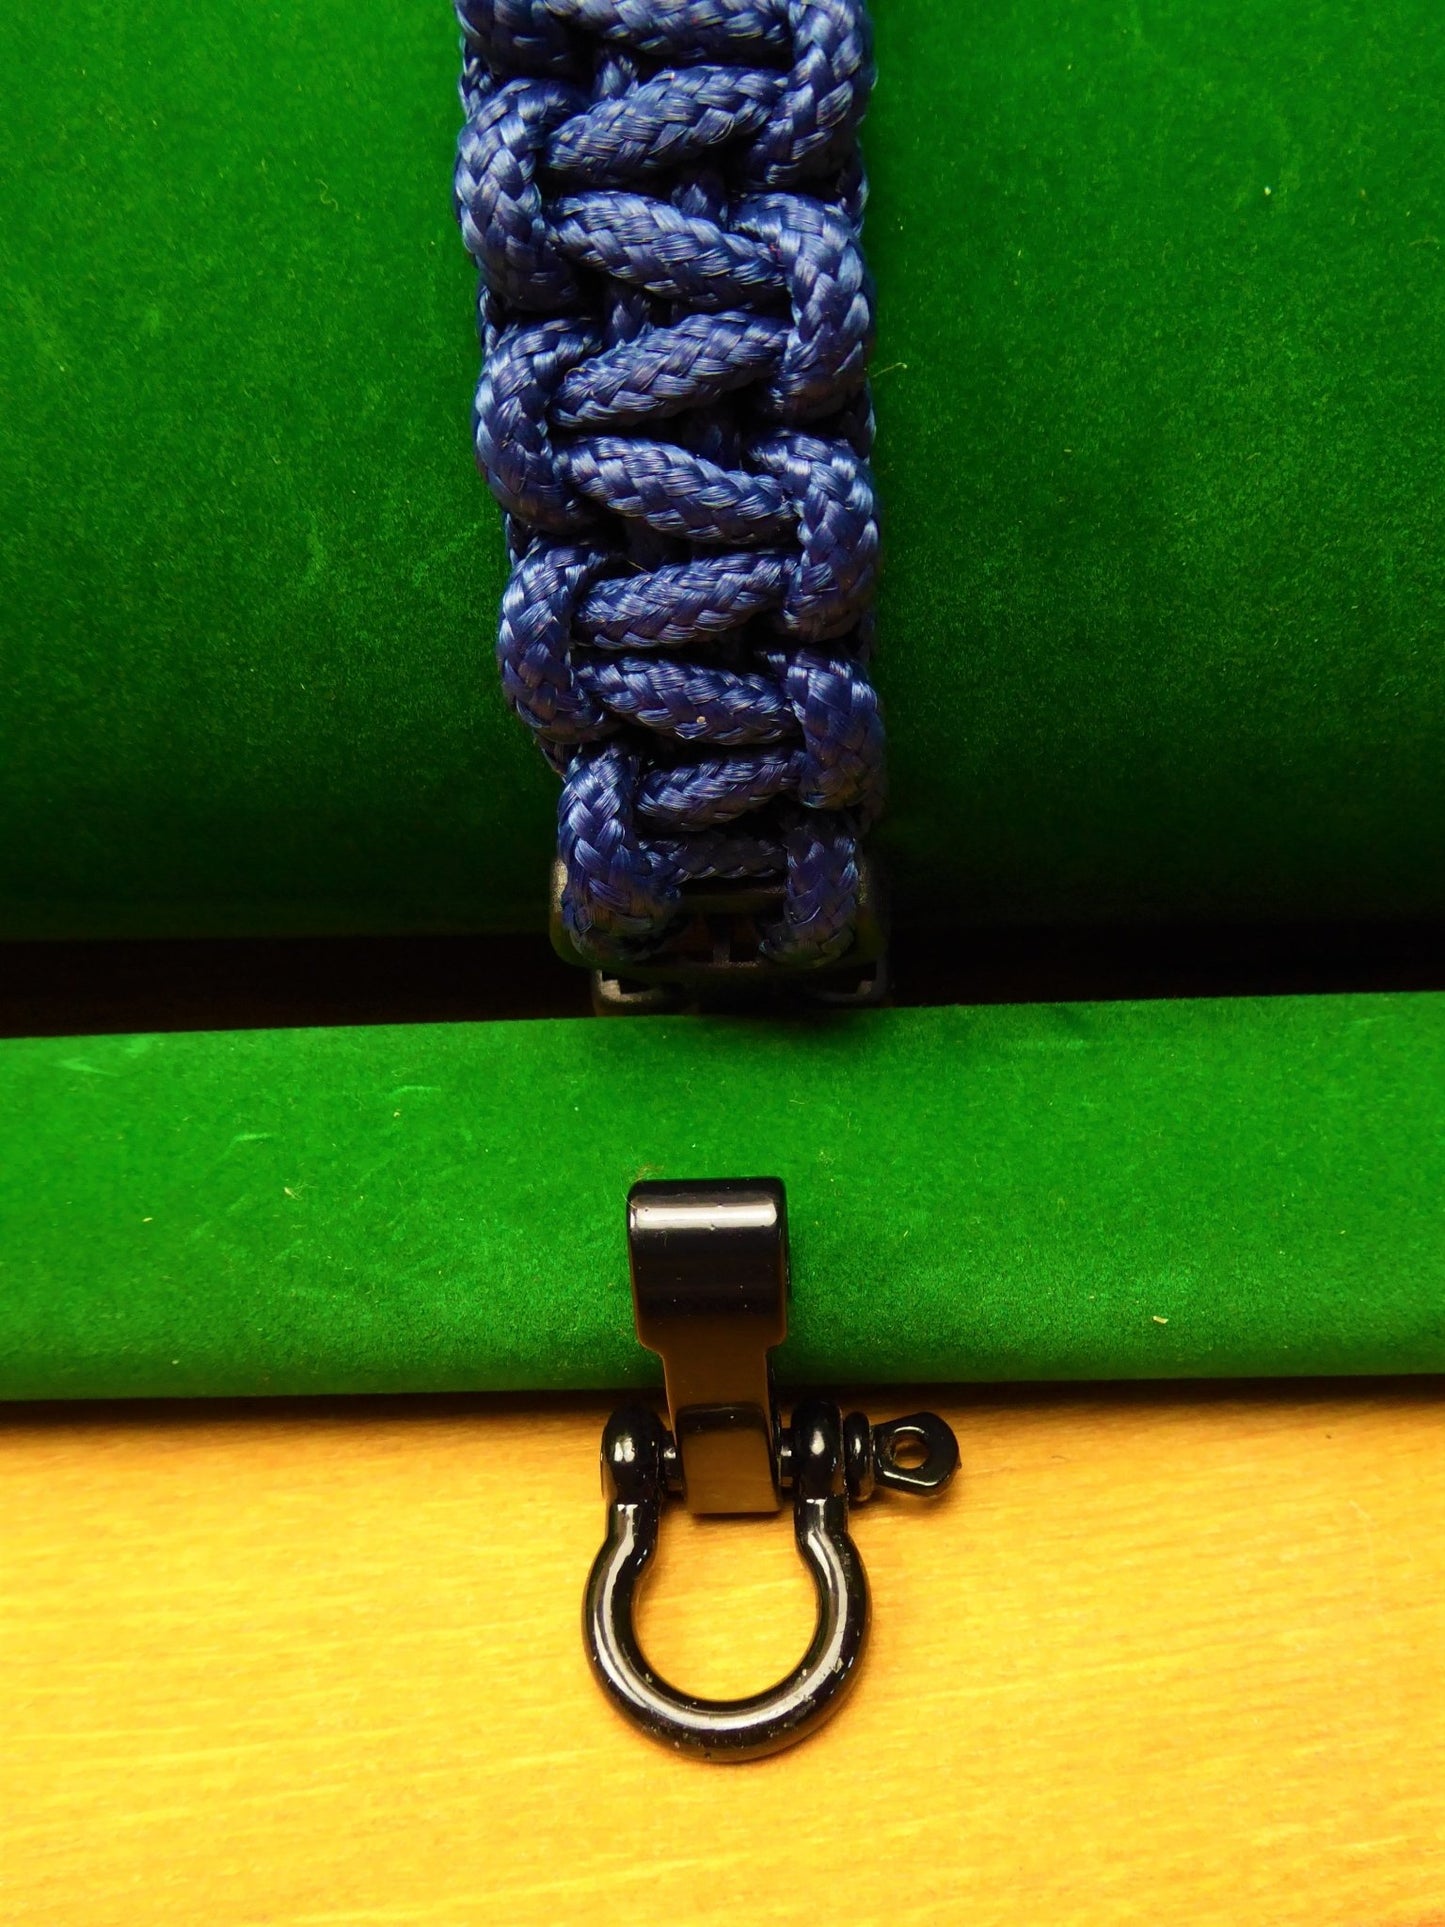 Paracord Buckle Bracelet kits with choice of colours Paracord Huggins Attic Navy Blue Shiny Black Buckle  [Huggins attic]